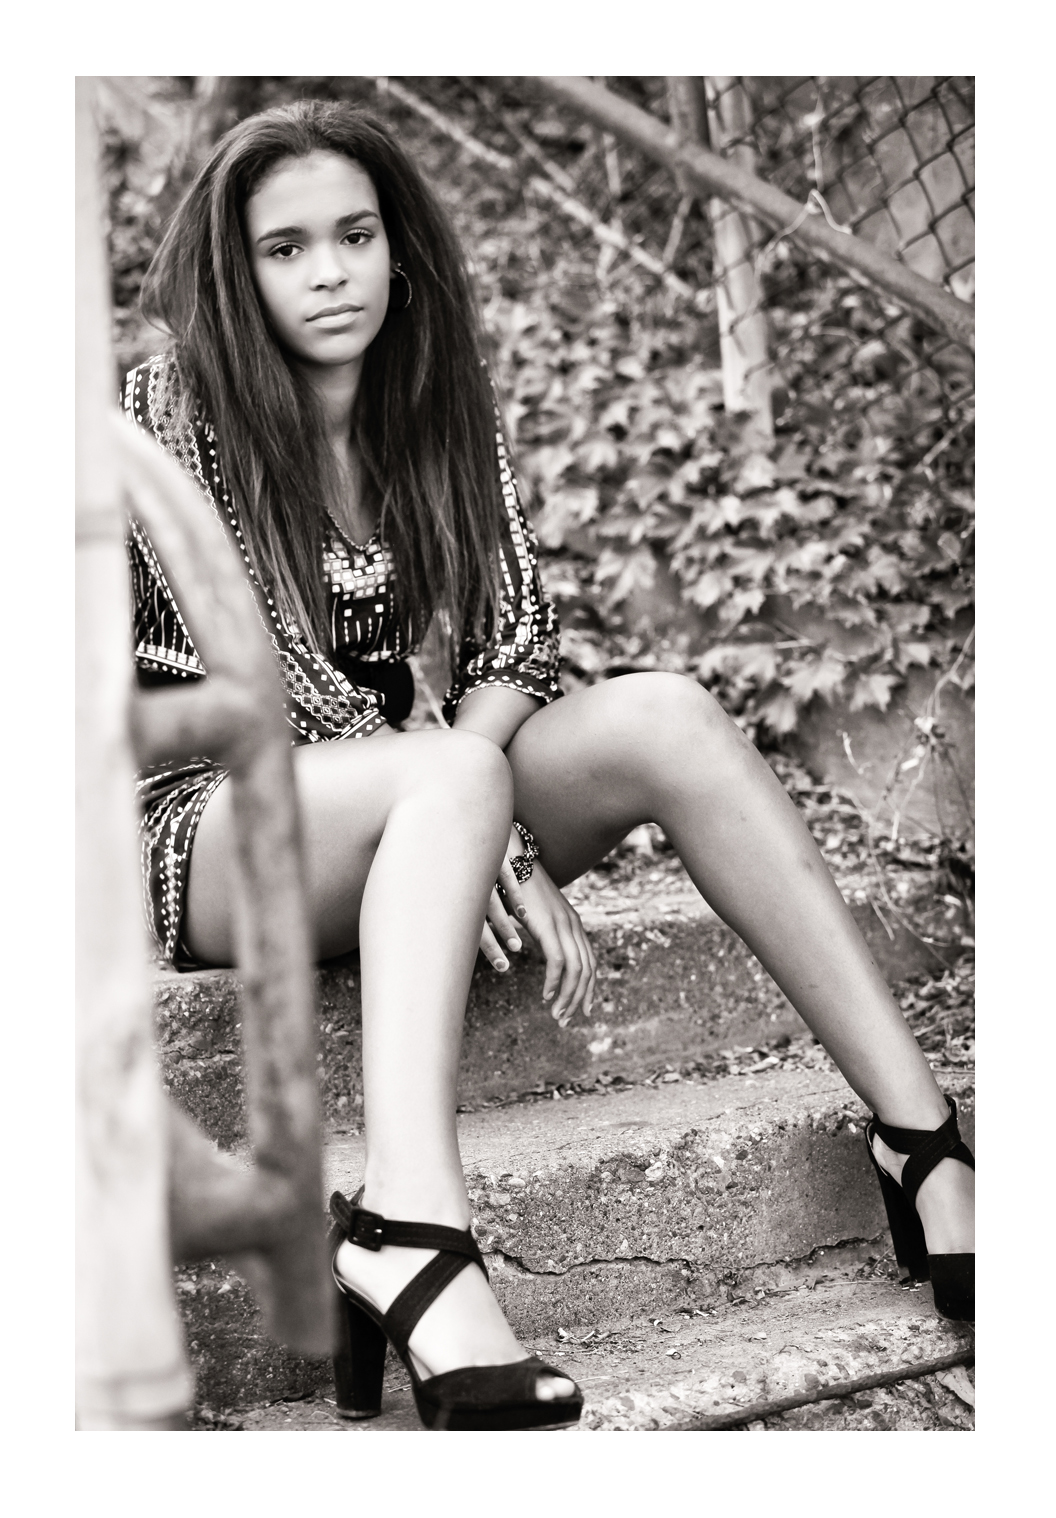 A young woman with straightened brown hair models facing the photographer while sitting on concrete steps wearing a glitzy dress and high heeled shoes